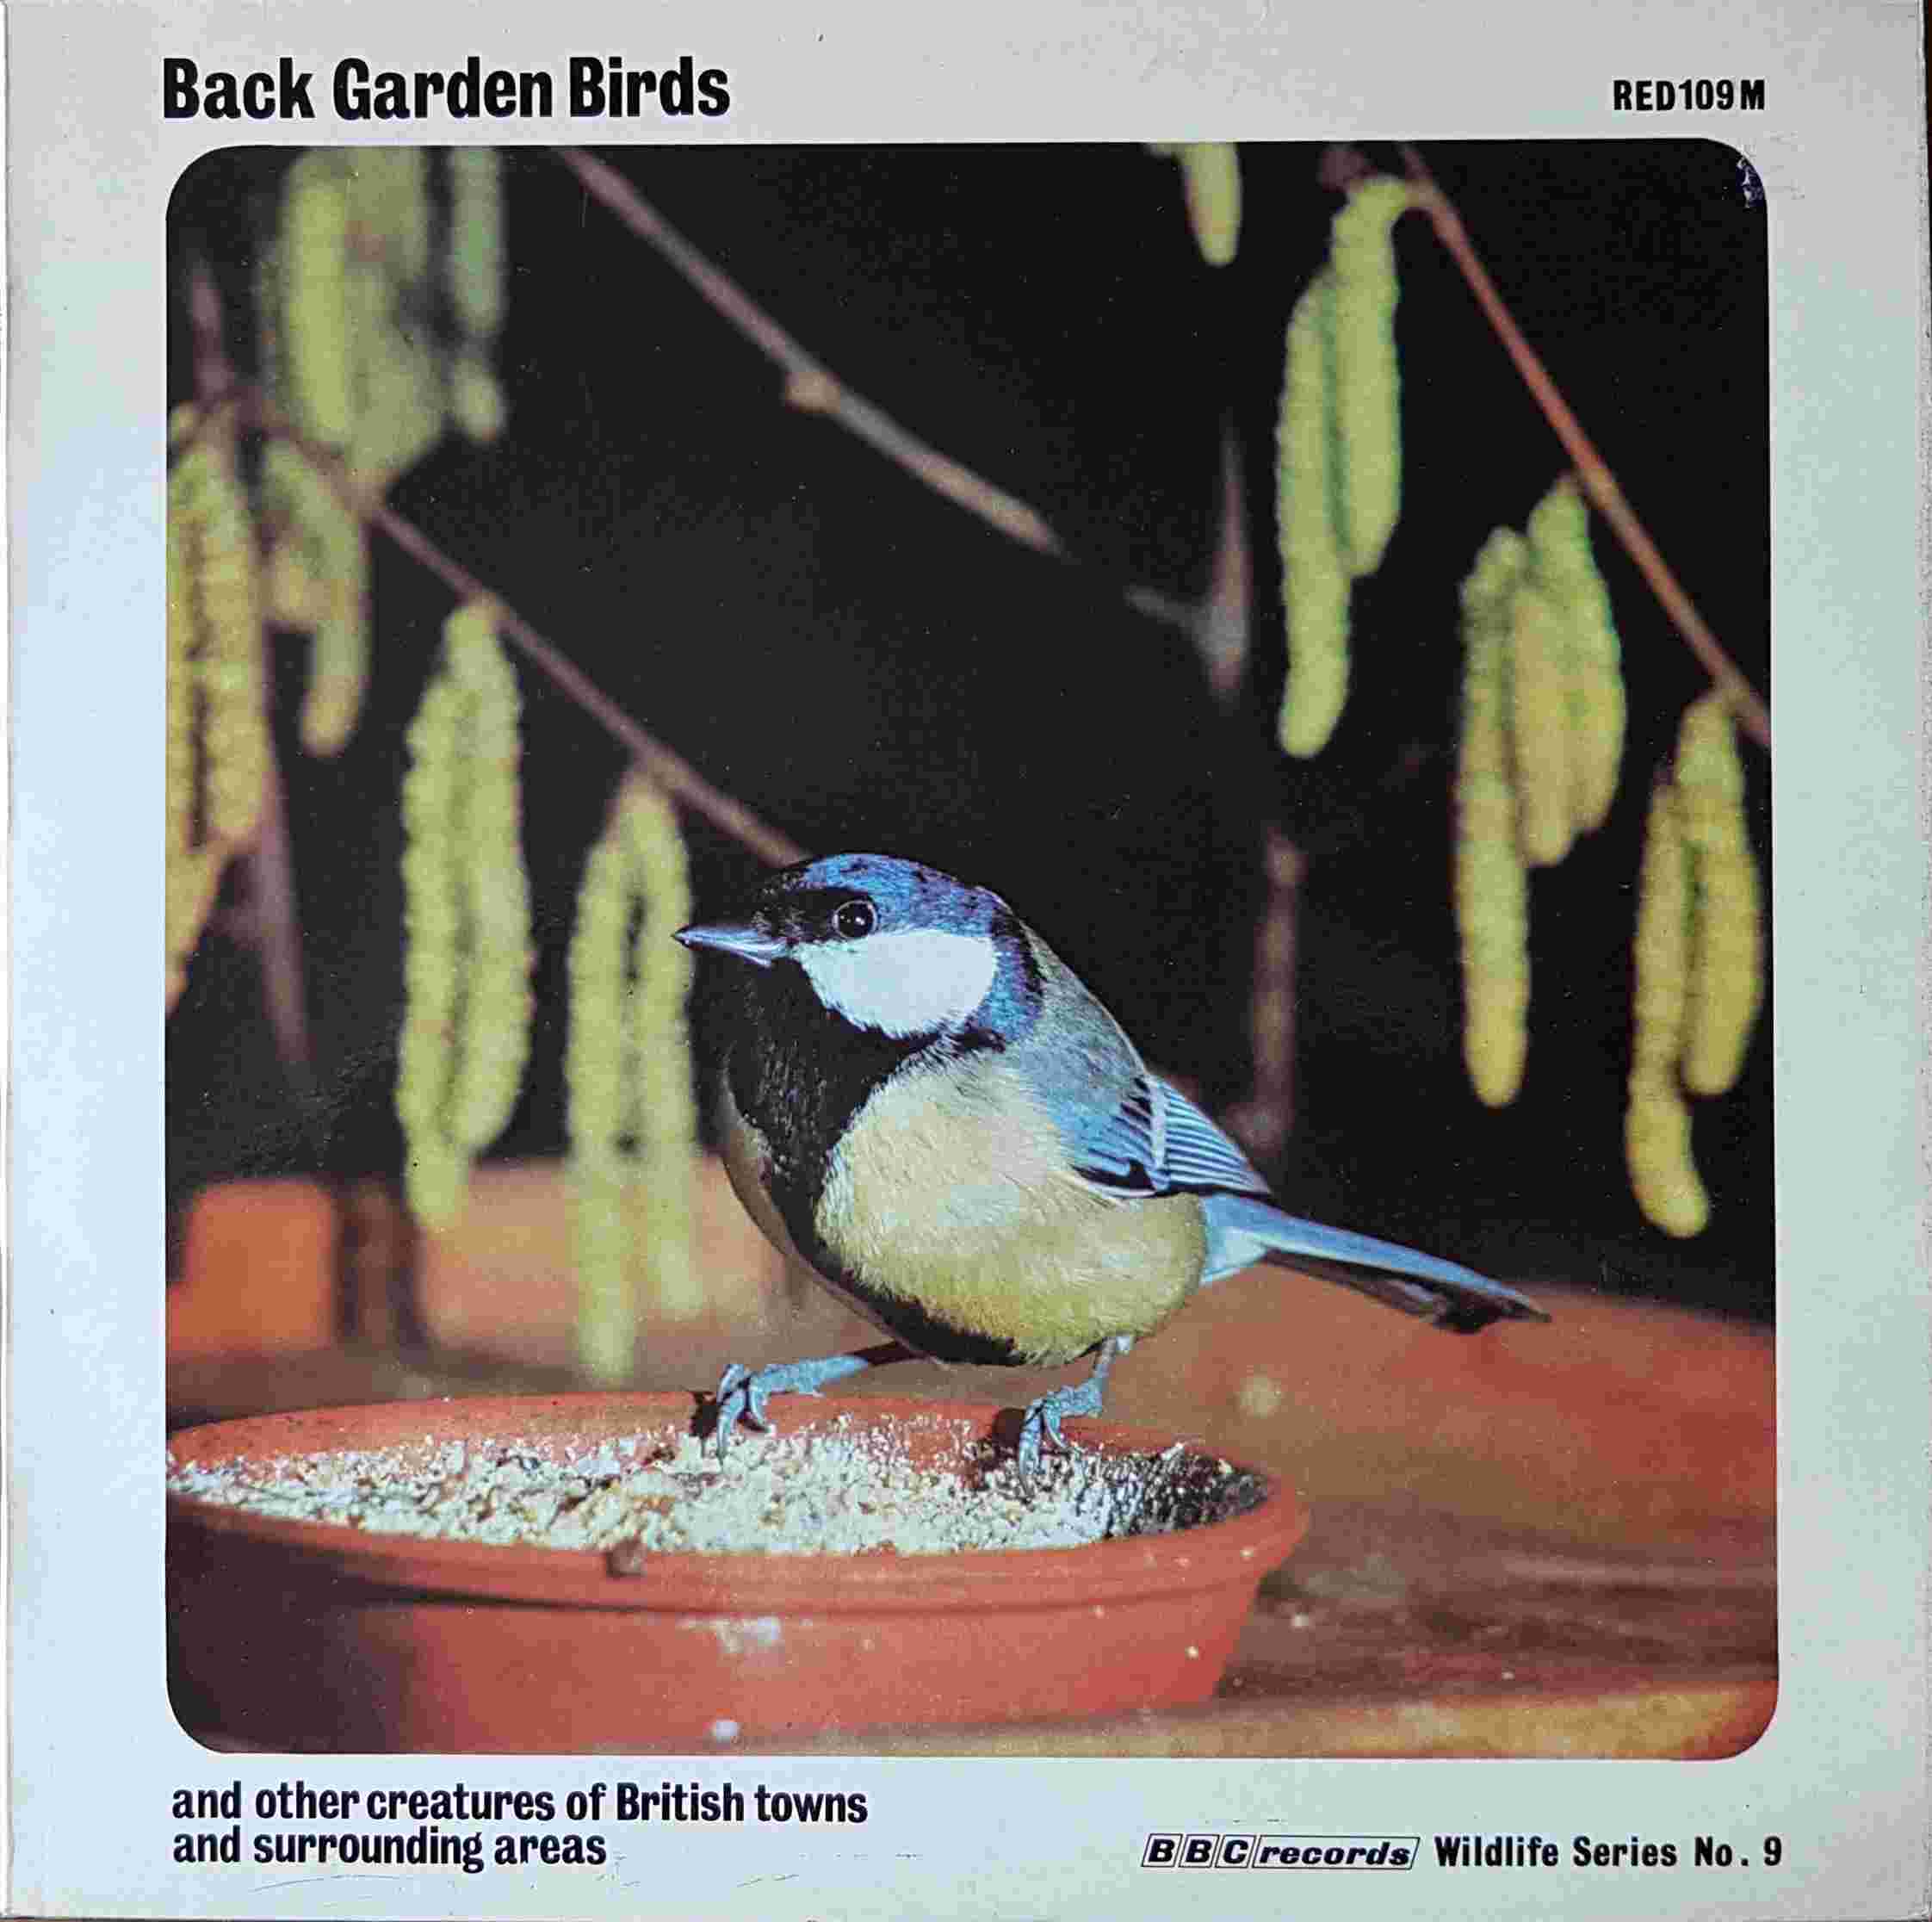 Picture of RED 109 Back garden birds - BBC wildlife series no. 9 by artist Various from the BBC albums - Records and Tapes library